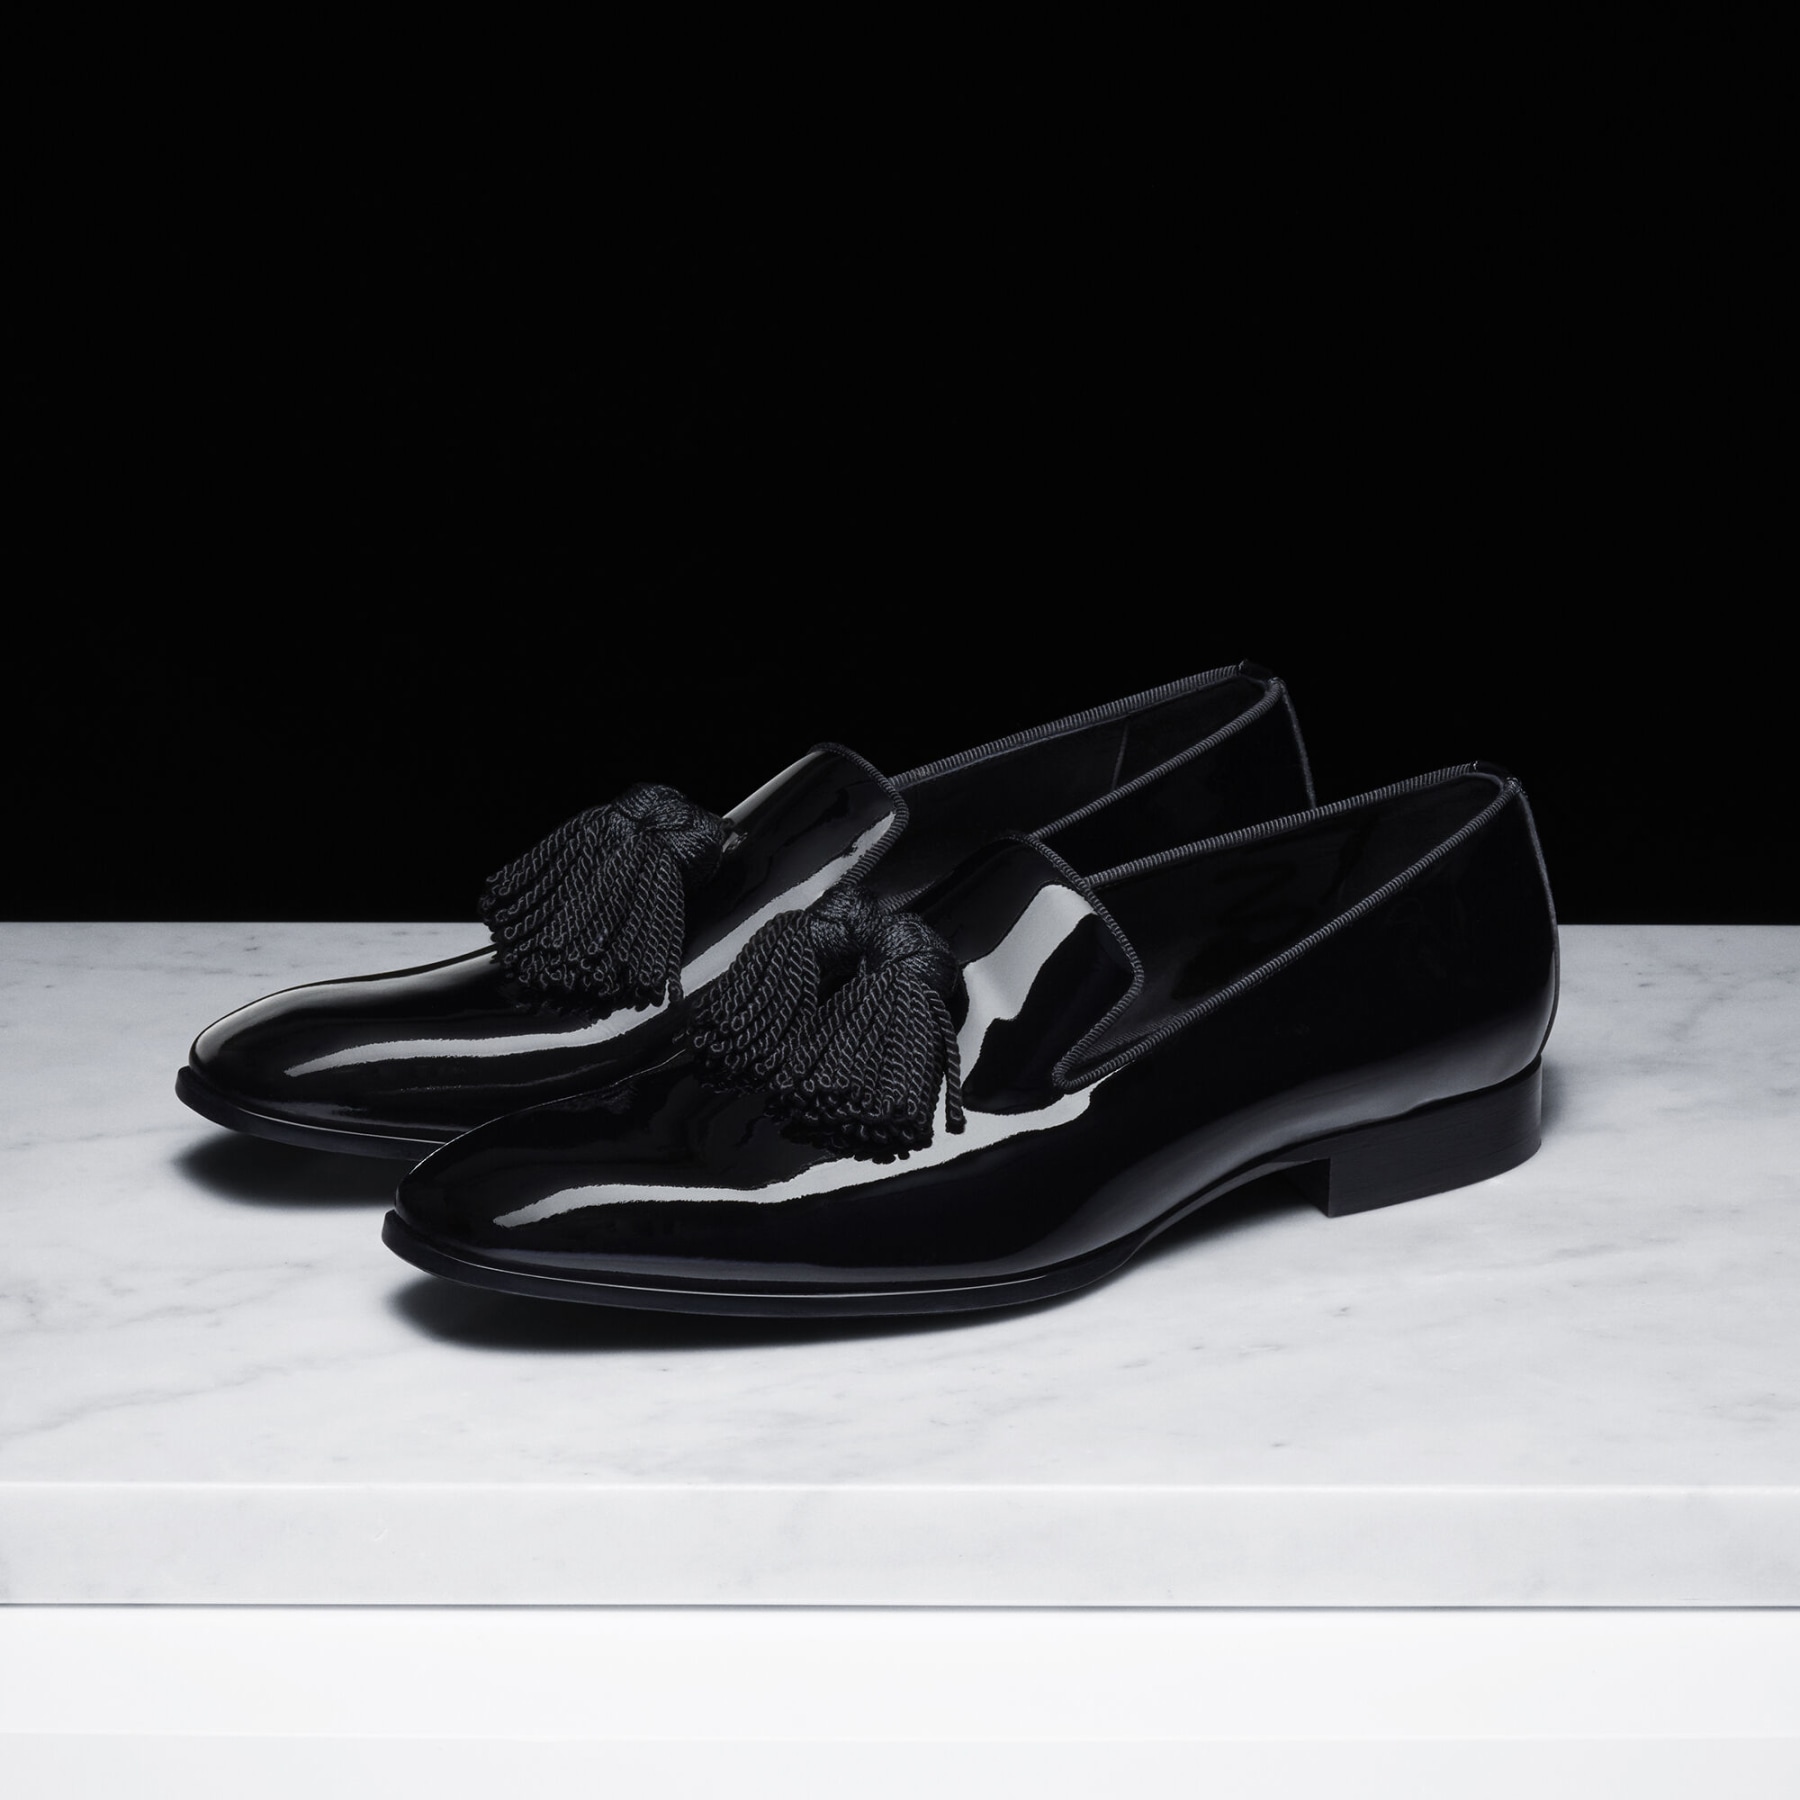 Black Soft Shiny Calf Leather Loafers | FOXLEY/M | Pre-Fall '20 